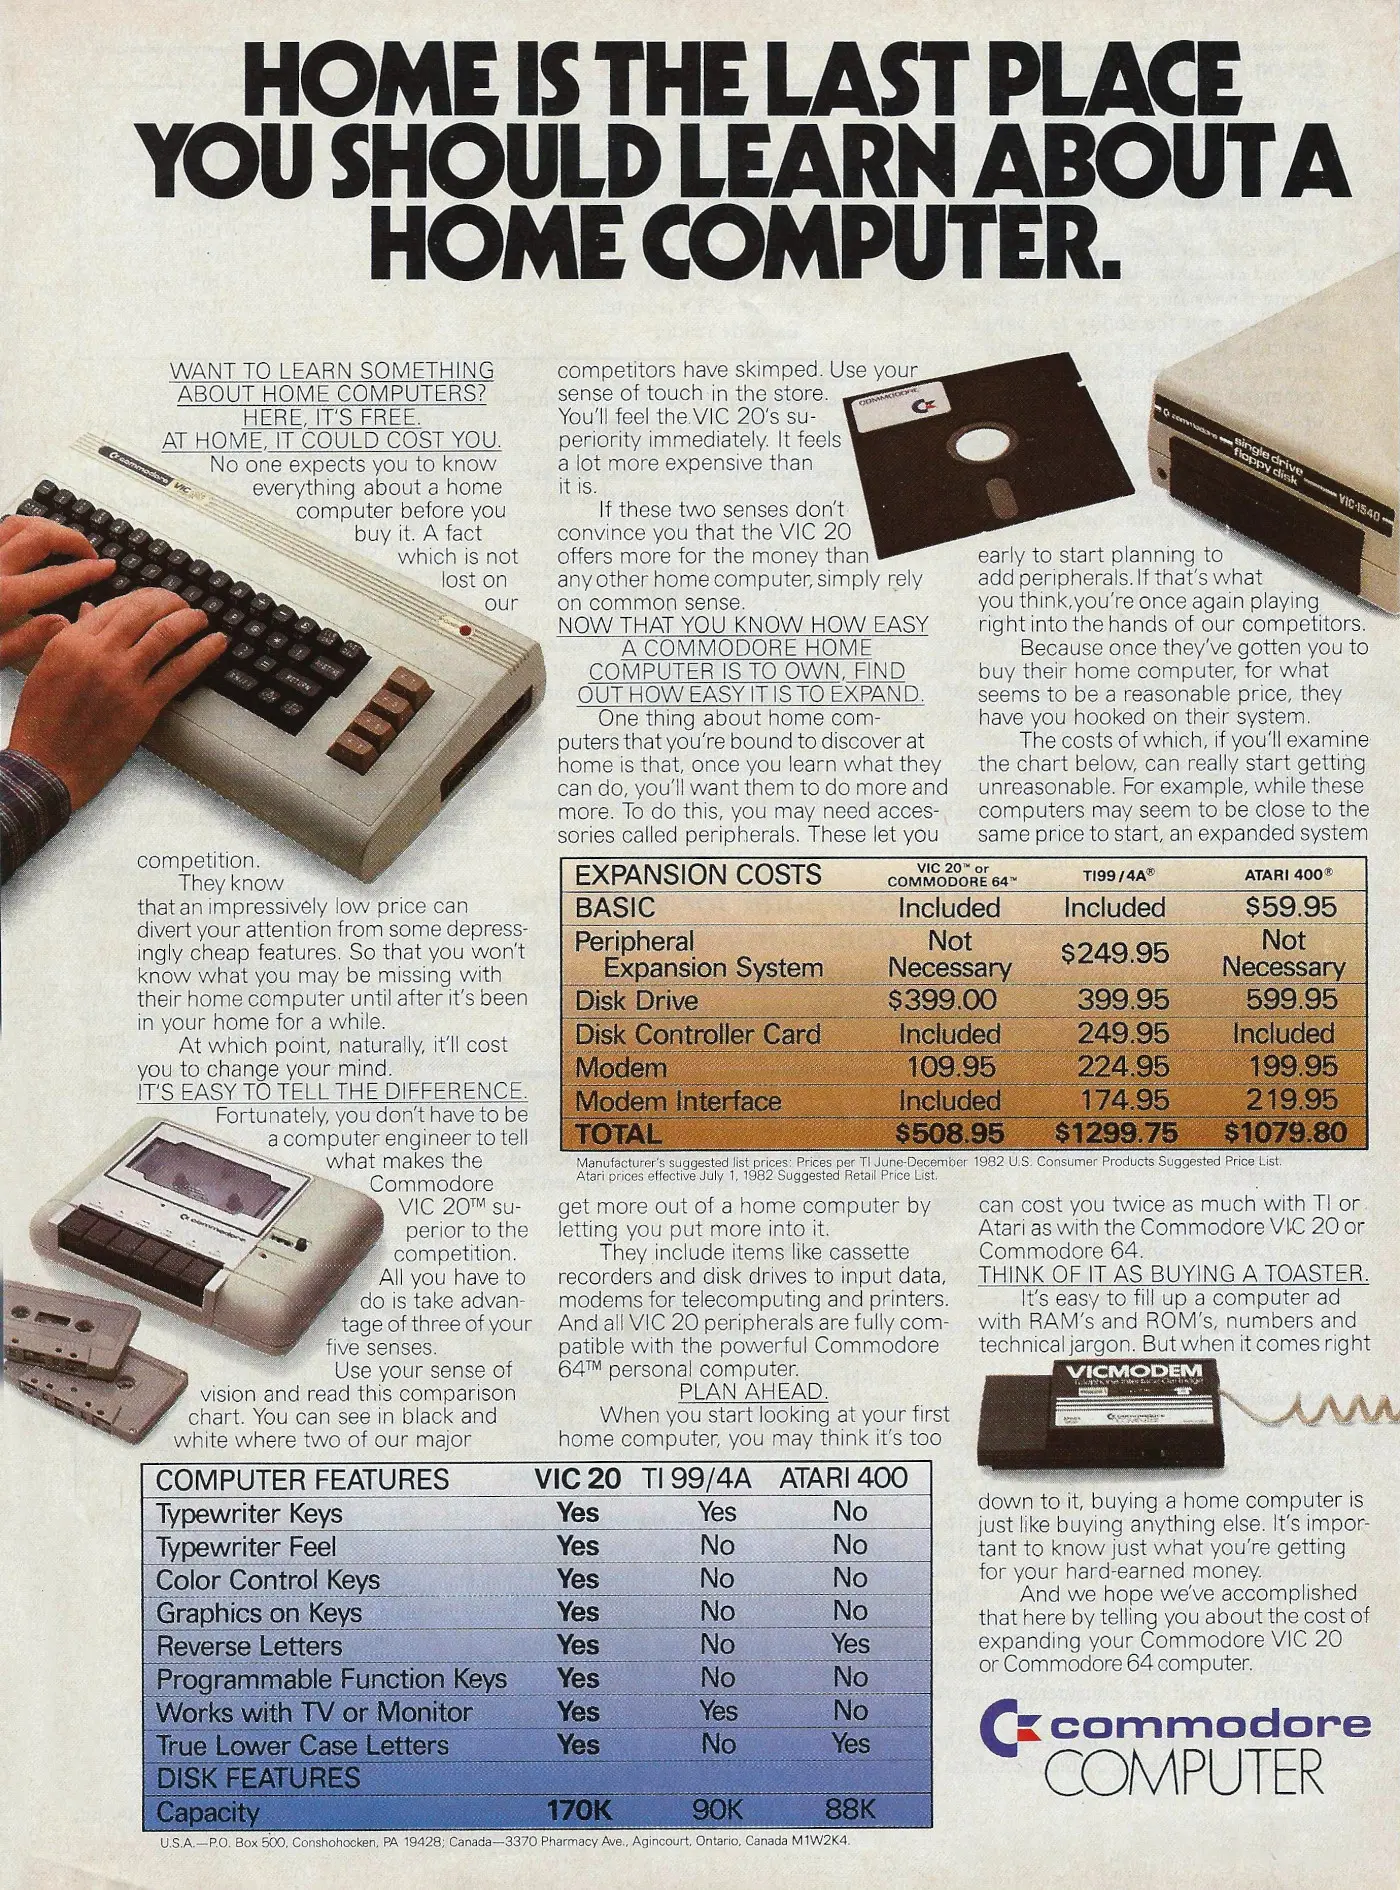 Commodore Advert: Home is the last place you should learn about a home computer, from Creative Computing, March 1983